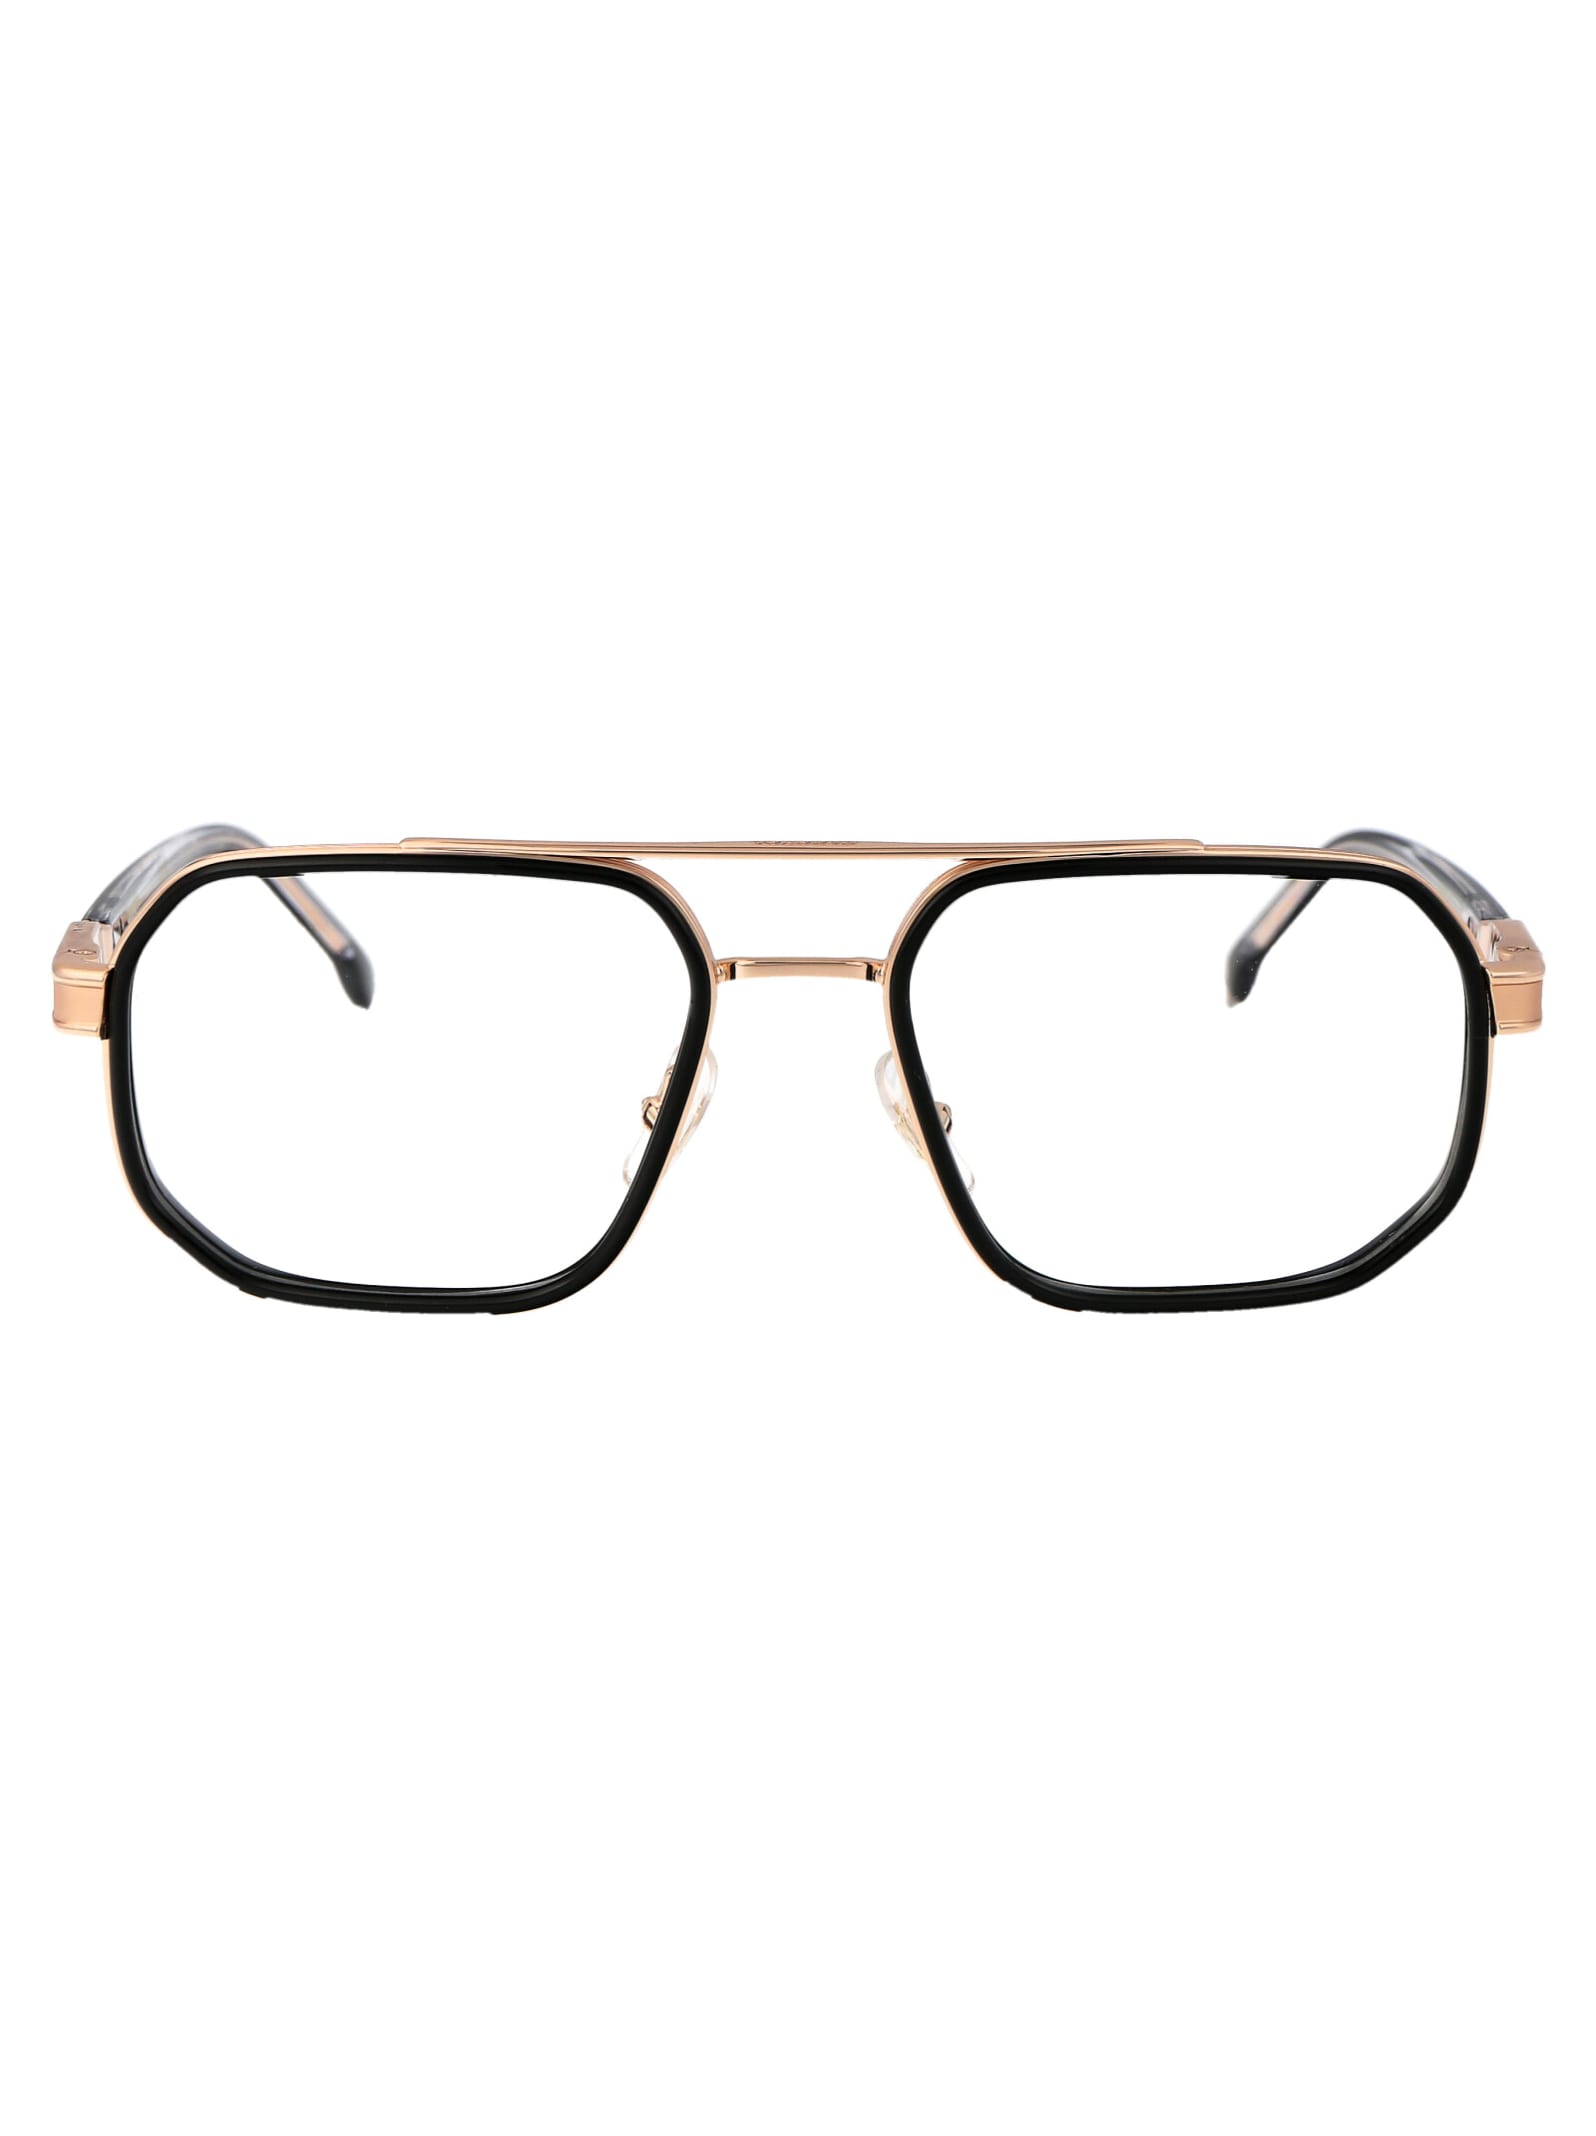 Carrera 1137 Glasses In 001 Yell Gold